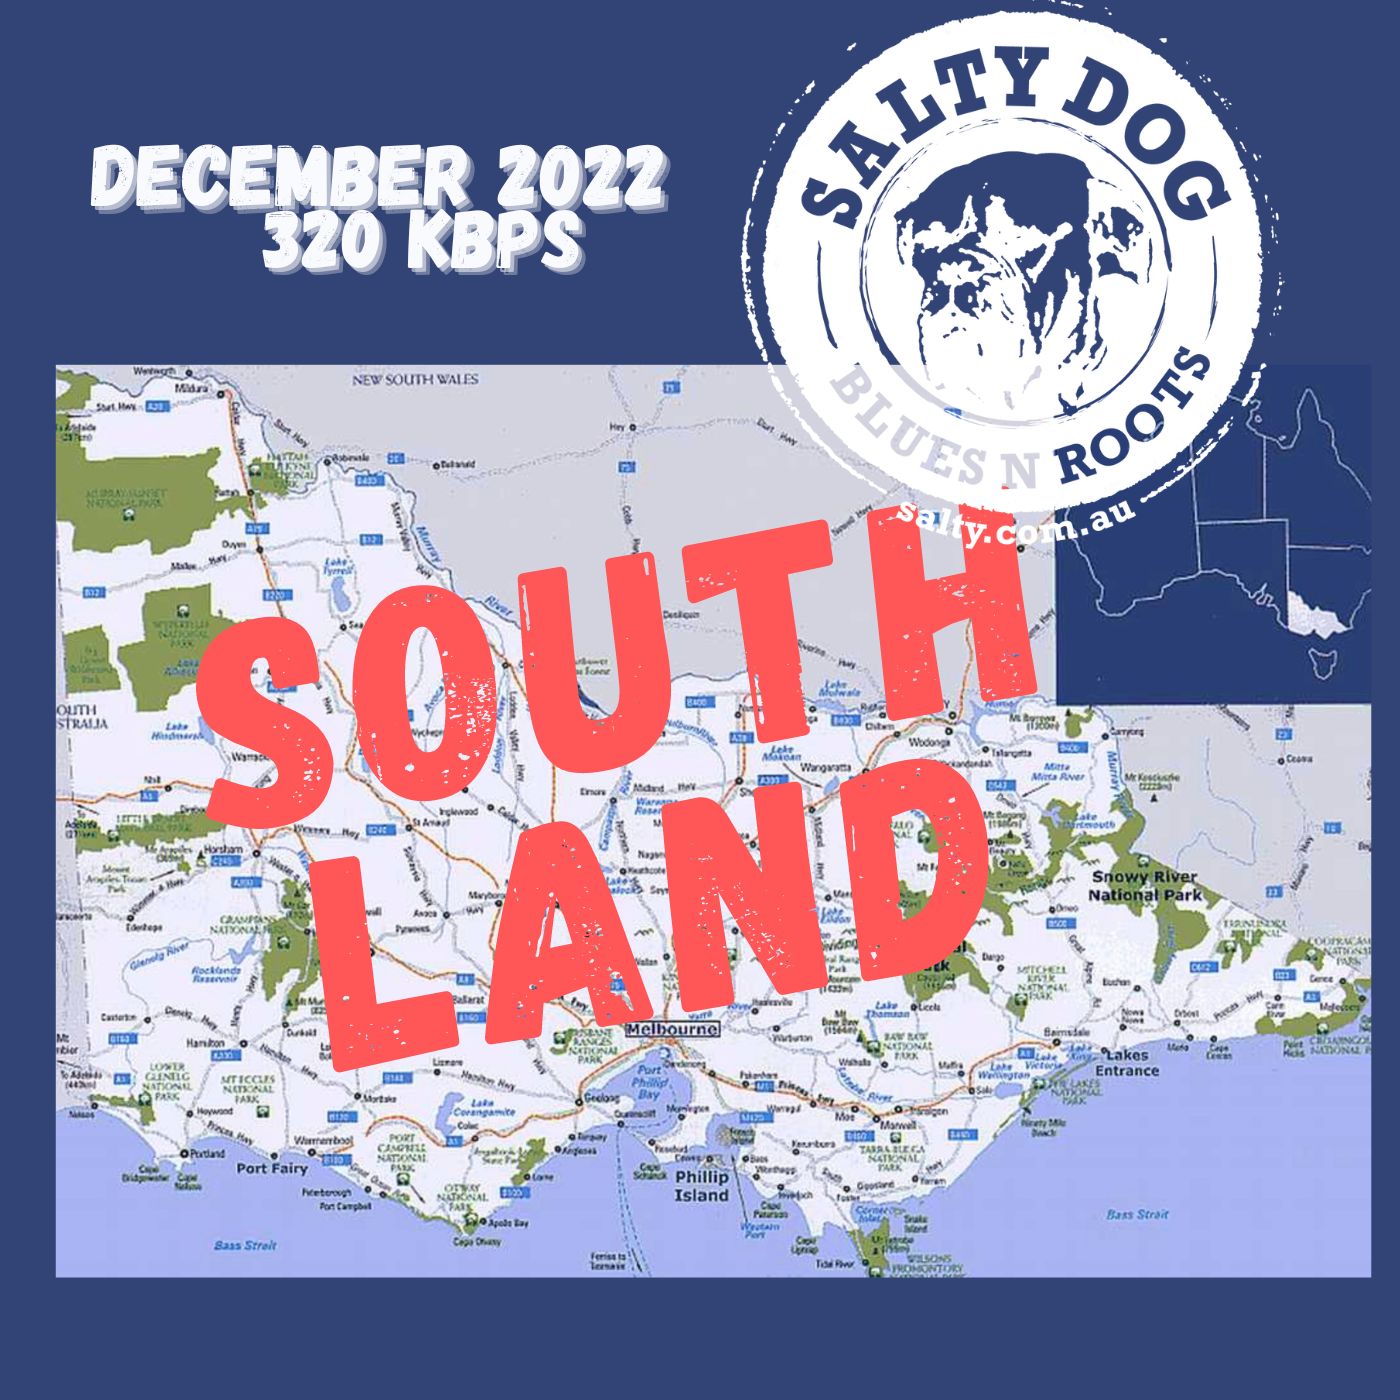 SOUTHLAND Blues N Roots - Salty Dog (December 2022)